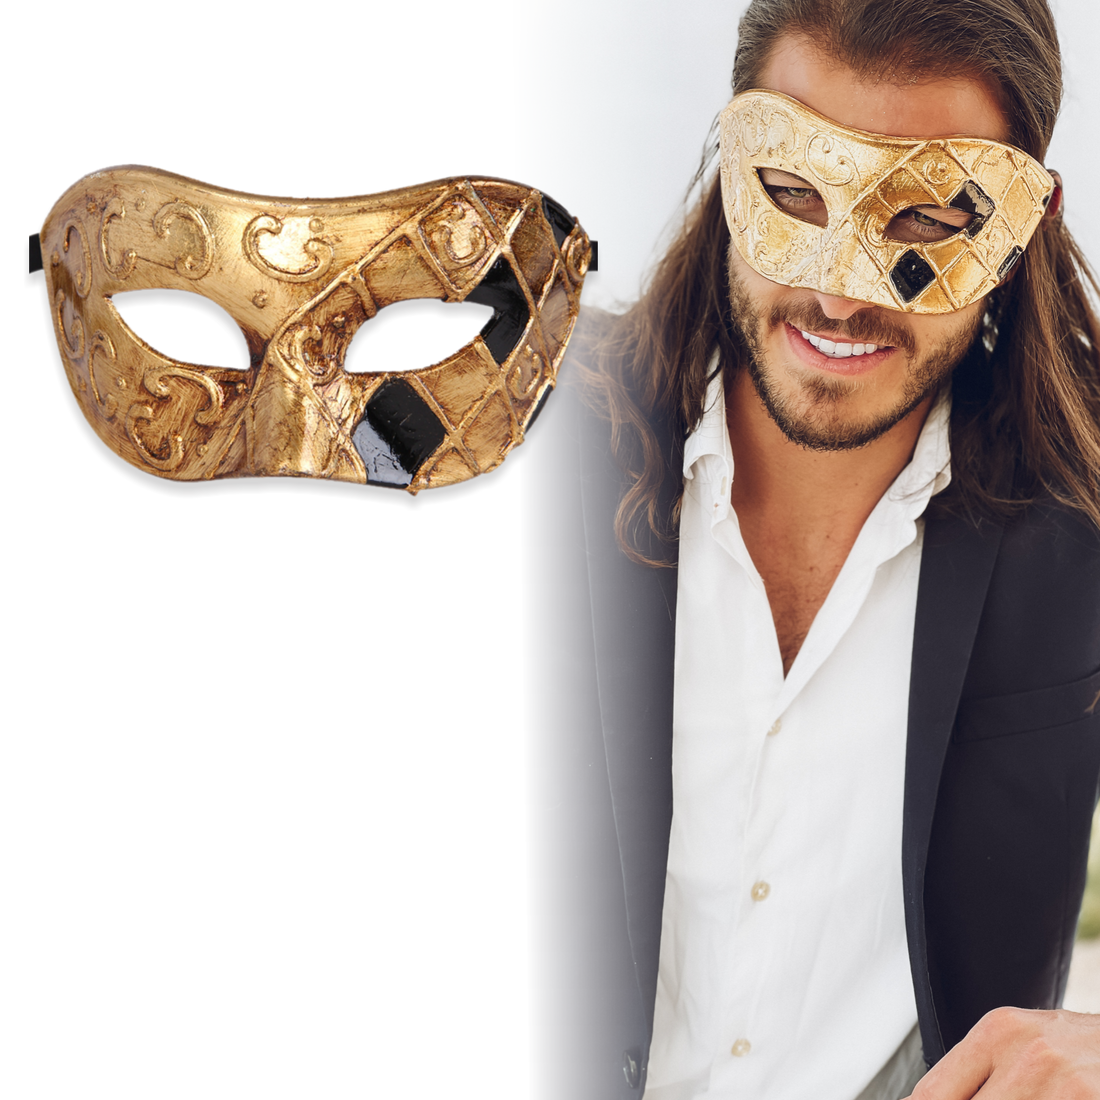 Discover the Intrigue of Masquerades with Our Men's Mask from LuxuryMask.com